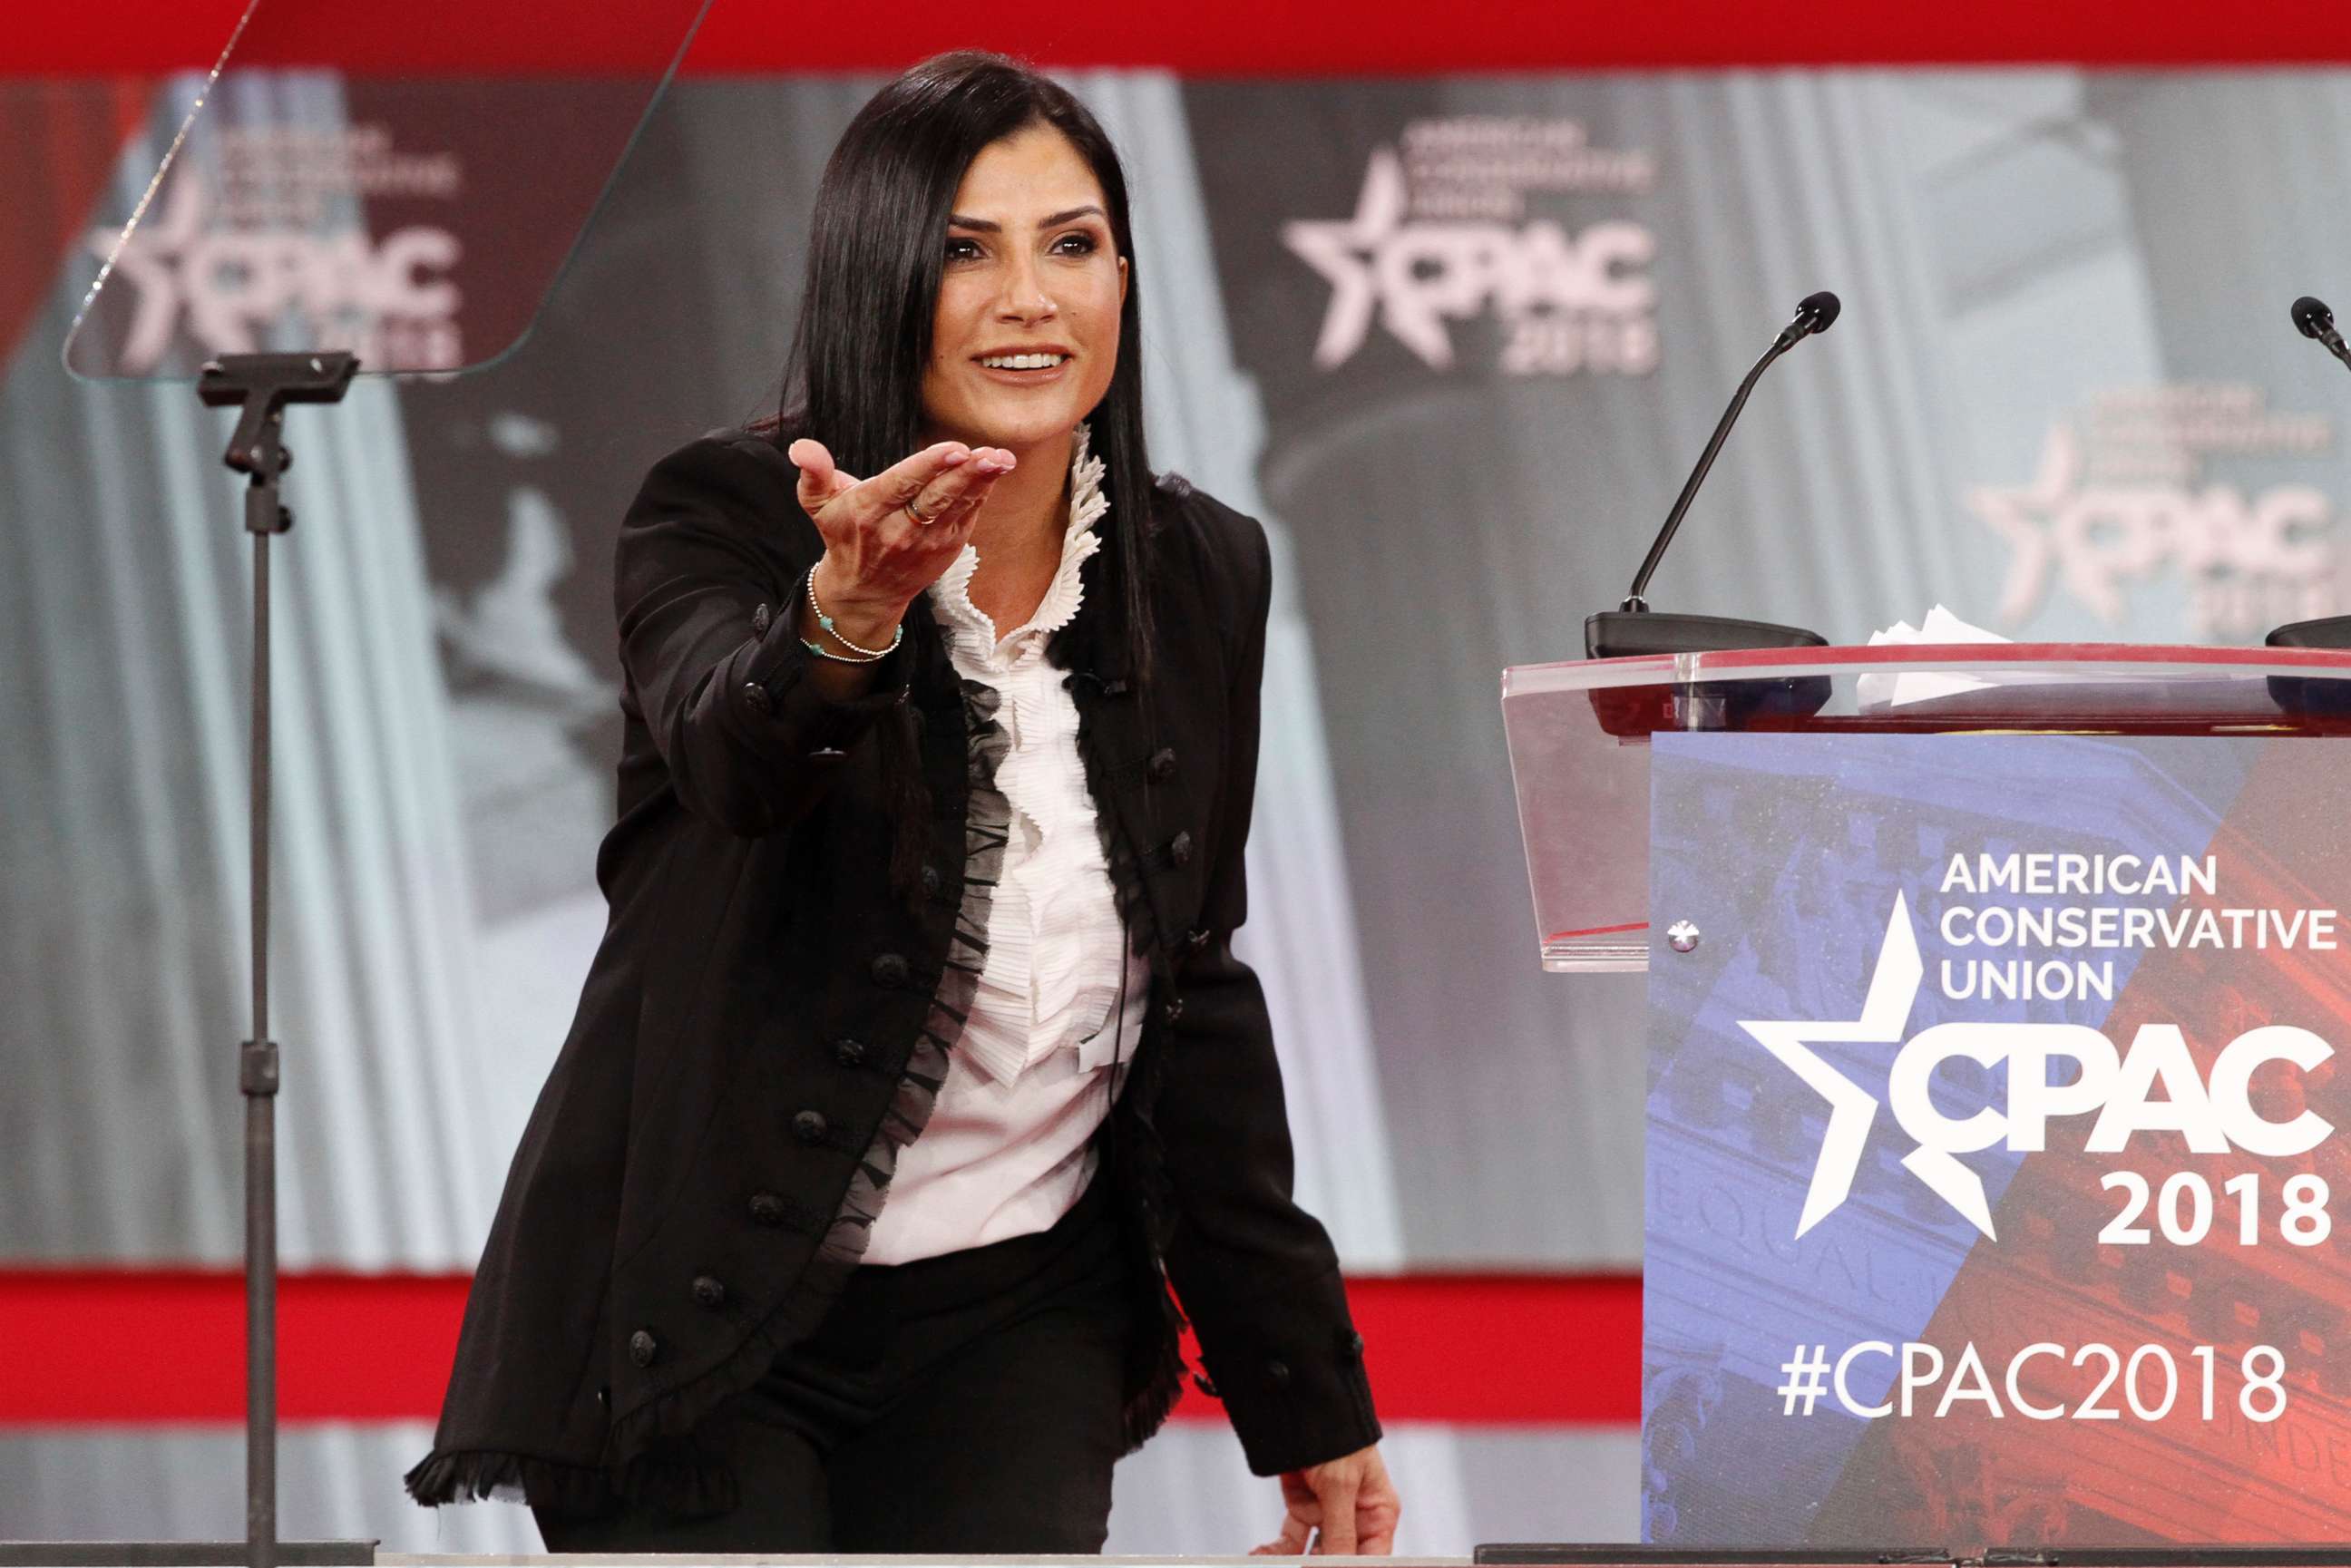 PHOTO: Dana Loesch, spokesperson for the National Rifle Association, speaks at the Conservative Political Action Conference (CPAC), at National Harbor, Md., Feb. 22, 2018.